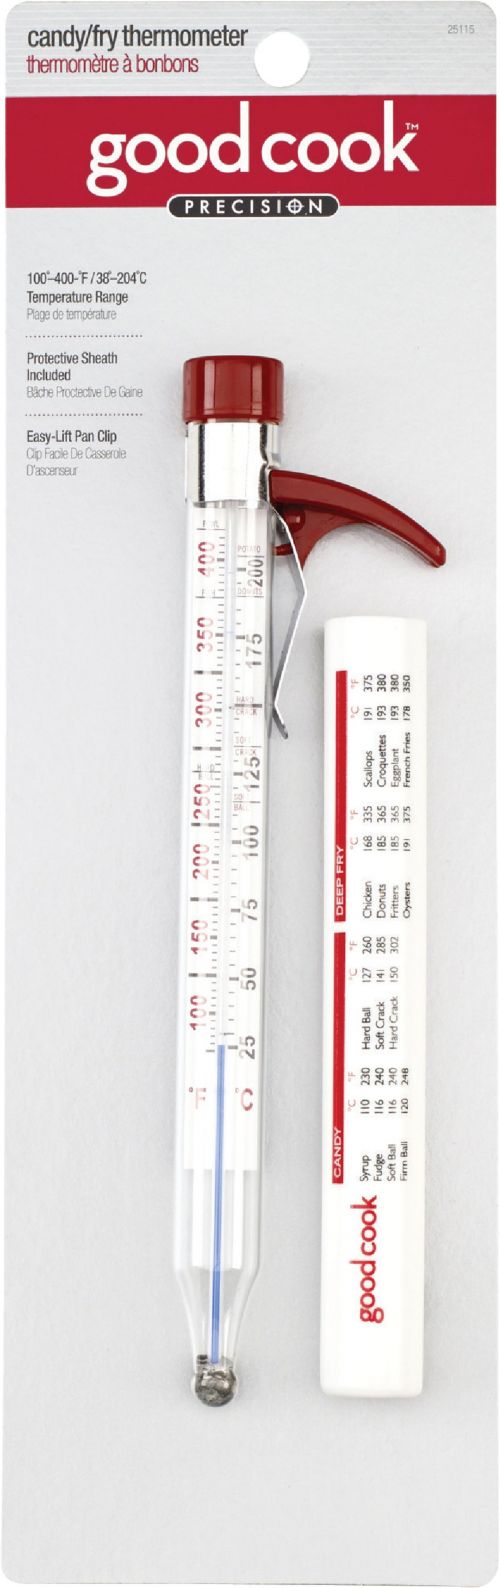 Taylor Trutemp Candy /Jelly / Deep Fry Thermometer